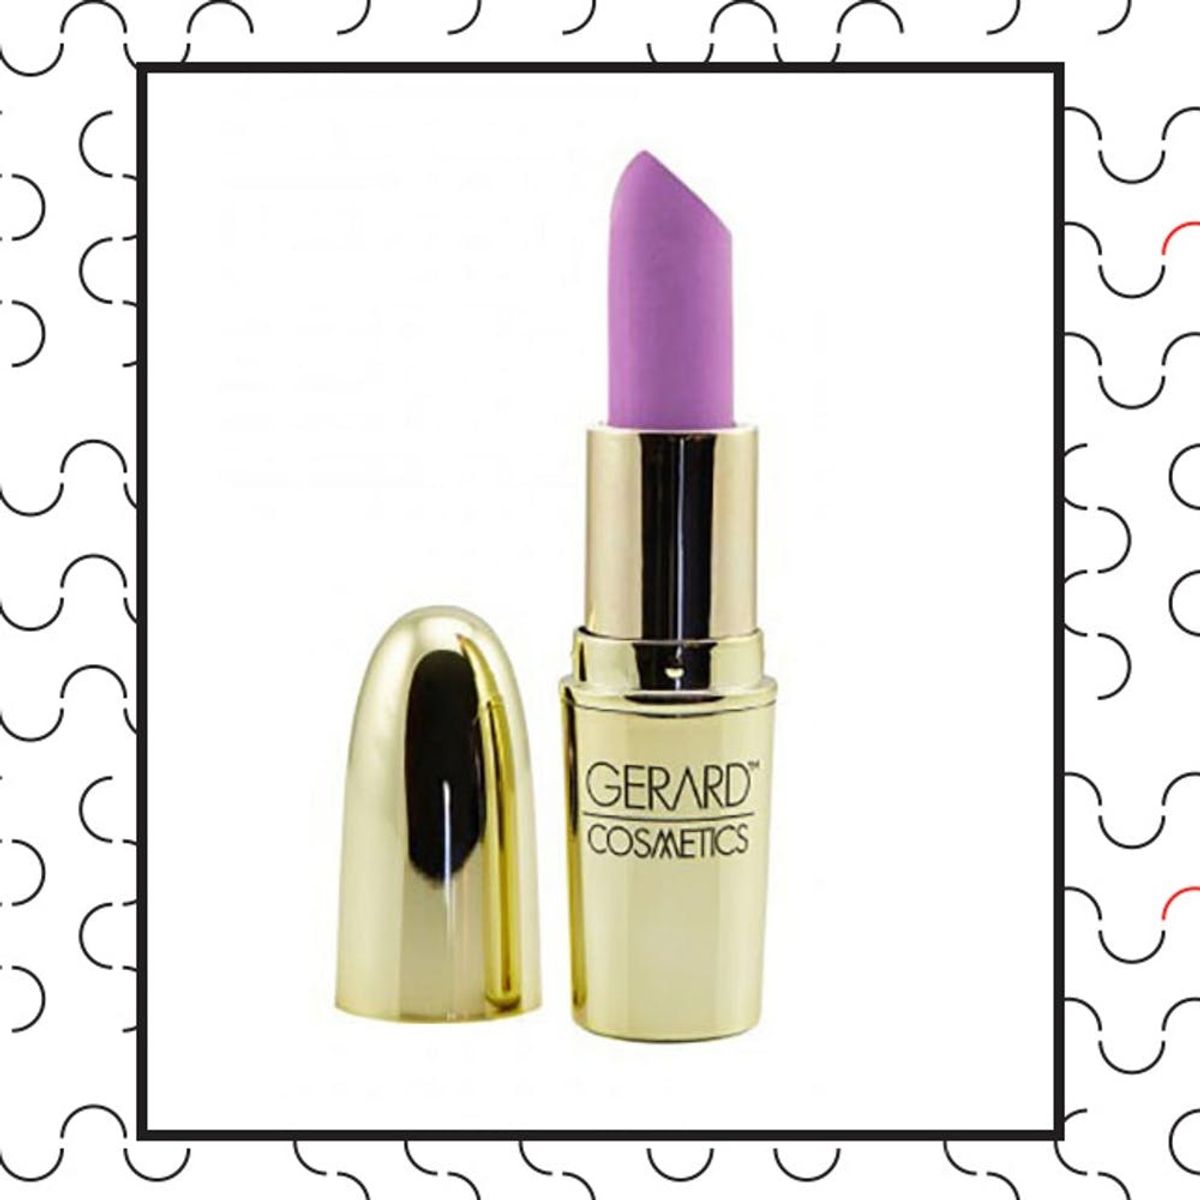 3 Reasons Why Lilac Should Be Your New Favorite Pastel Makeup Color